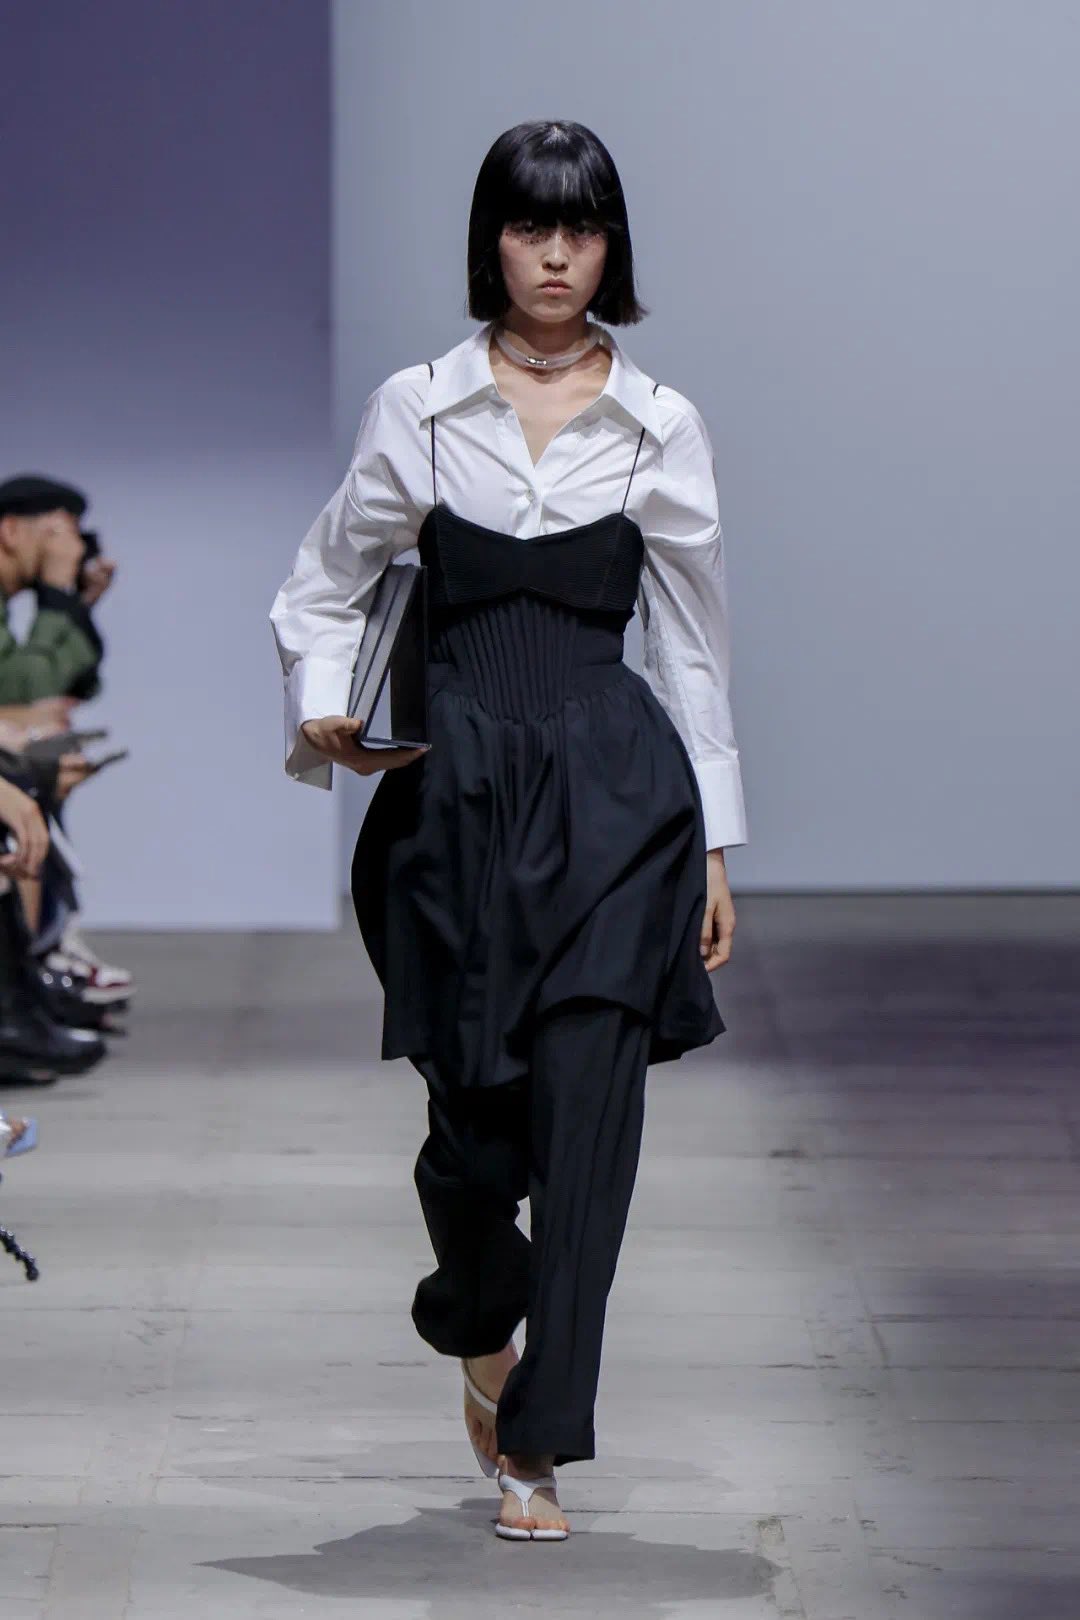 Shanghai Fashion Week Trends No Matter How Interesting The Colors Are Black White Has Always Been The Protagonist Element In Fashion Trends In Ss22 Shanghaifashionweek The Black White Color